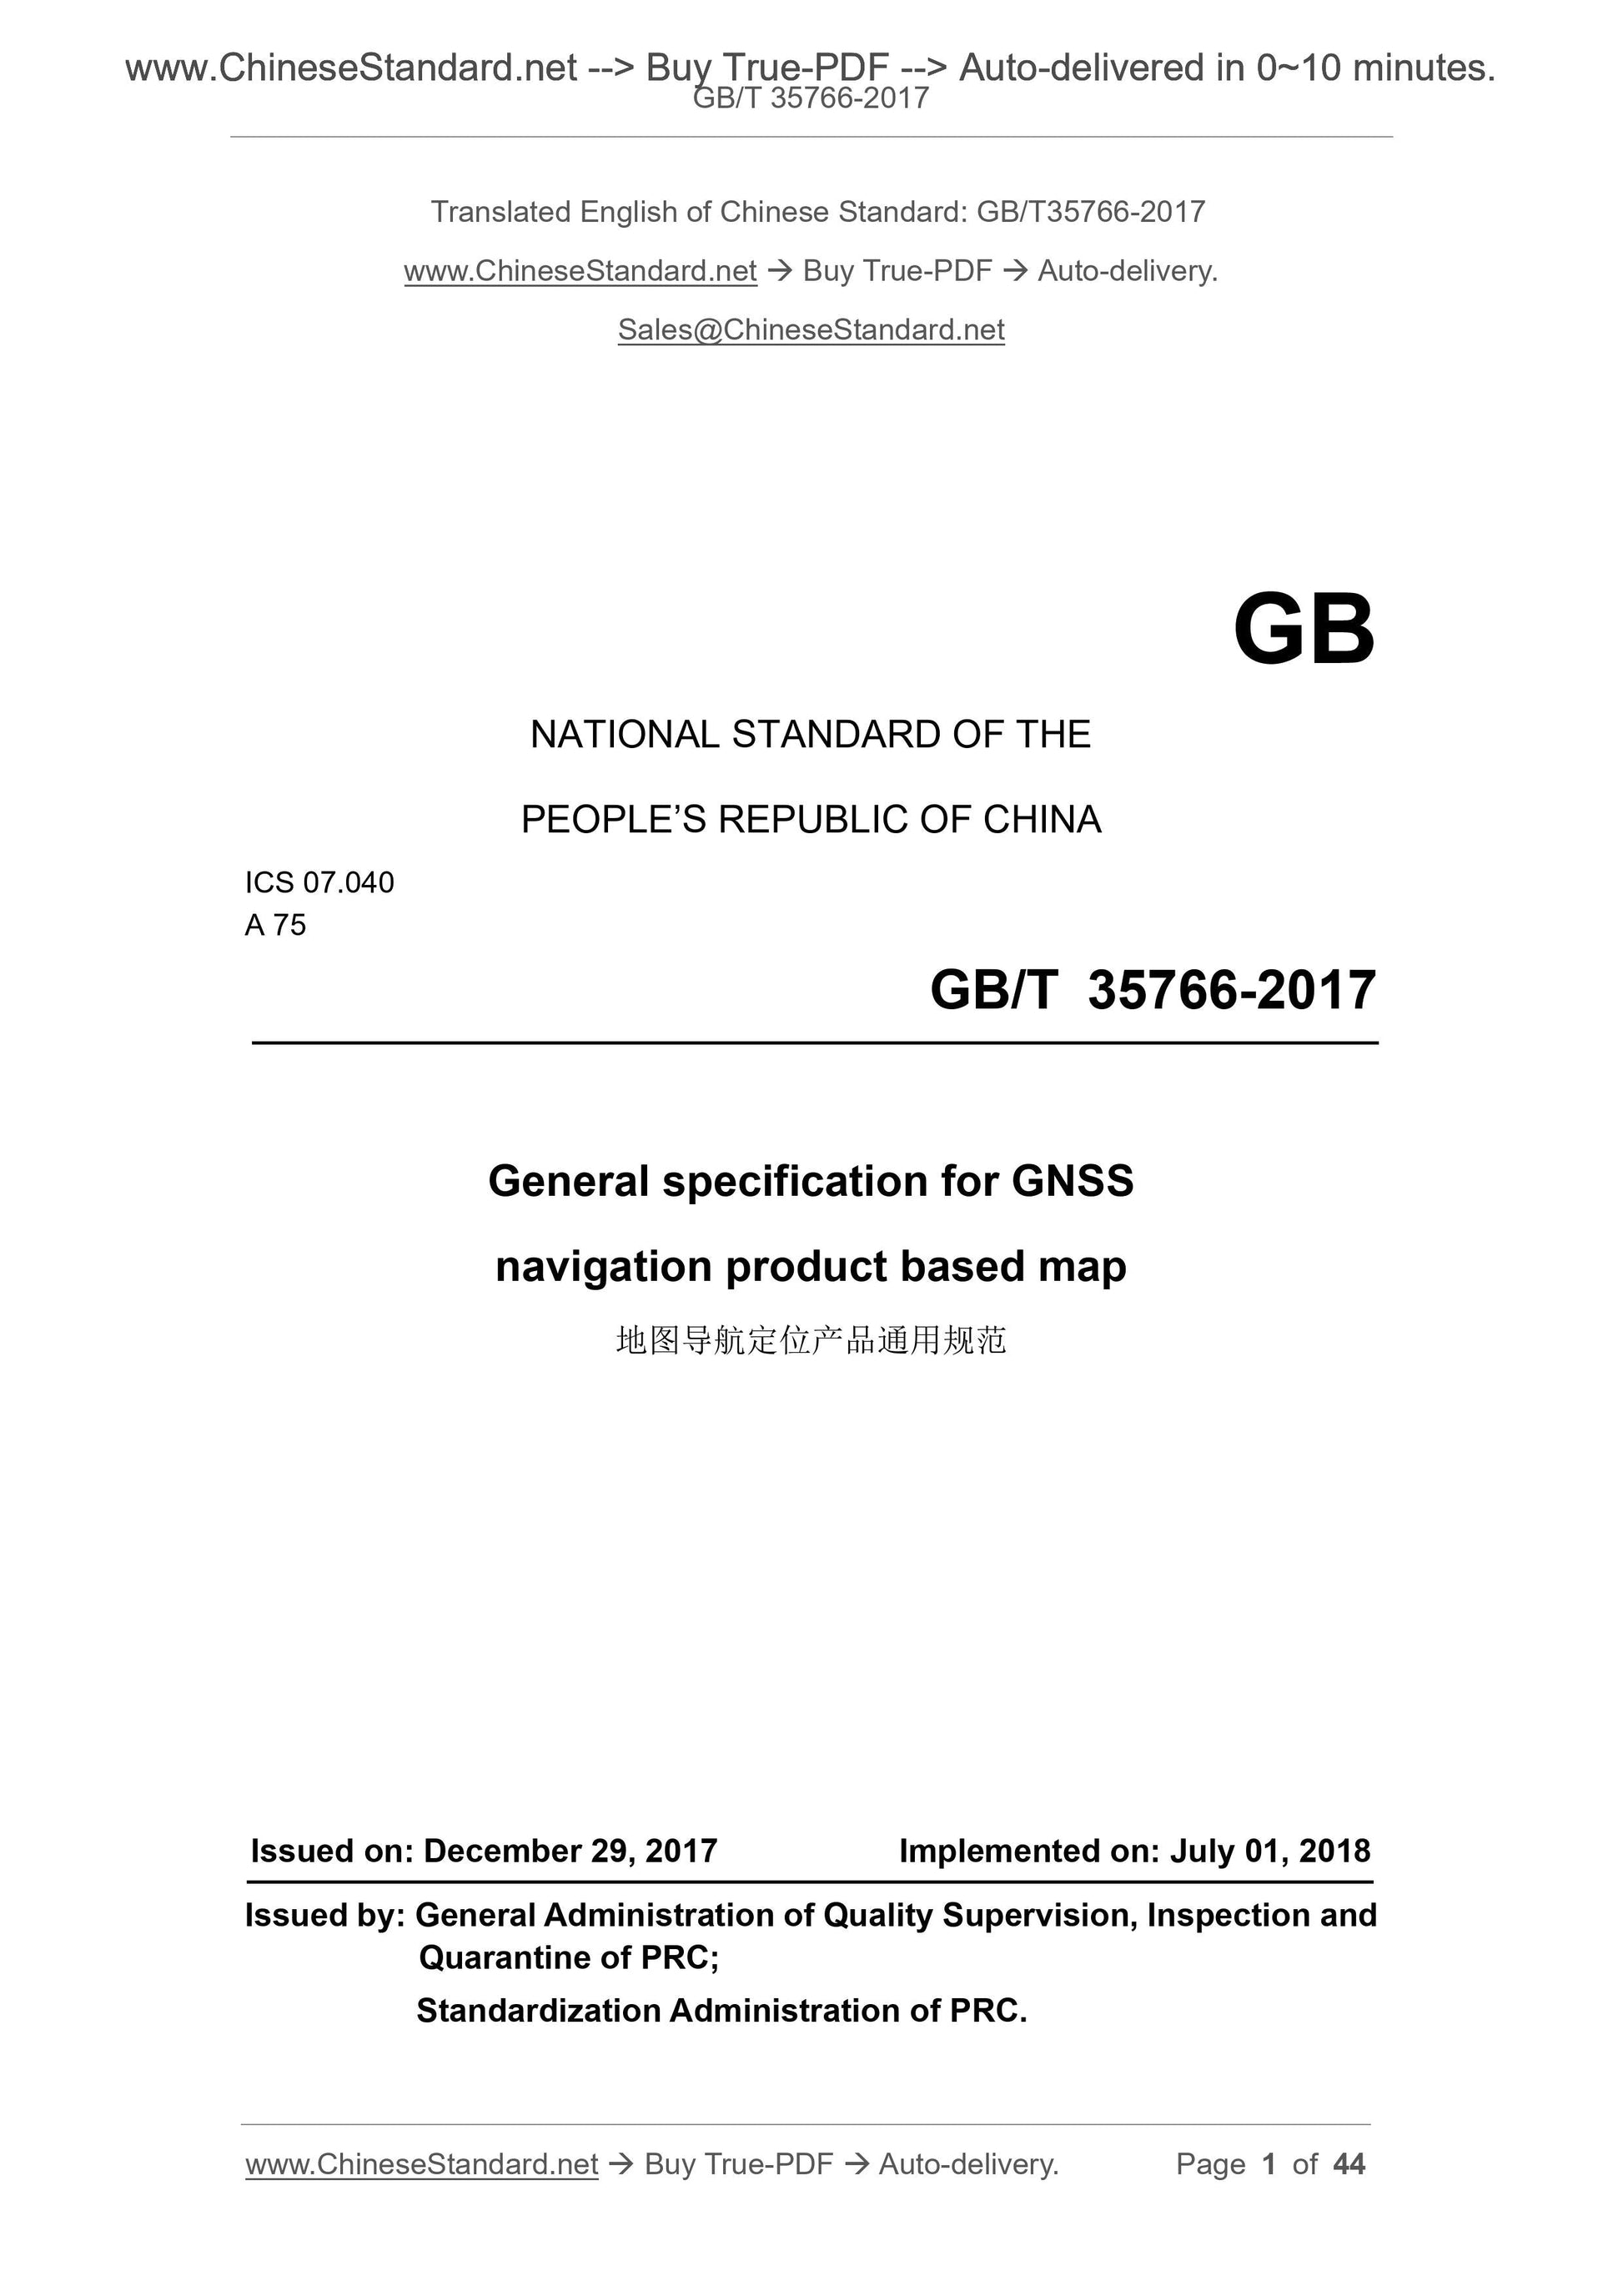 GB/T 35766-2017 Page 1